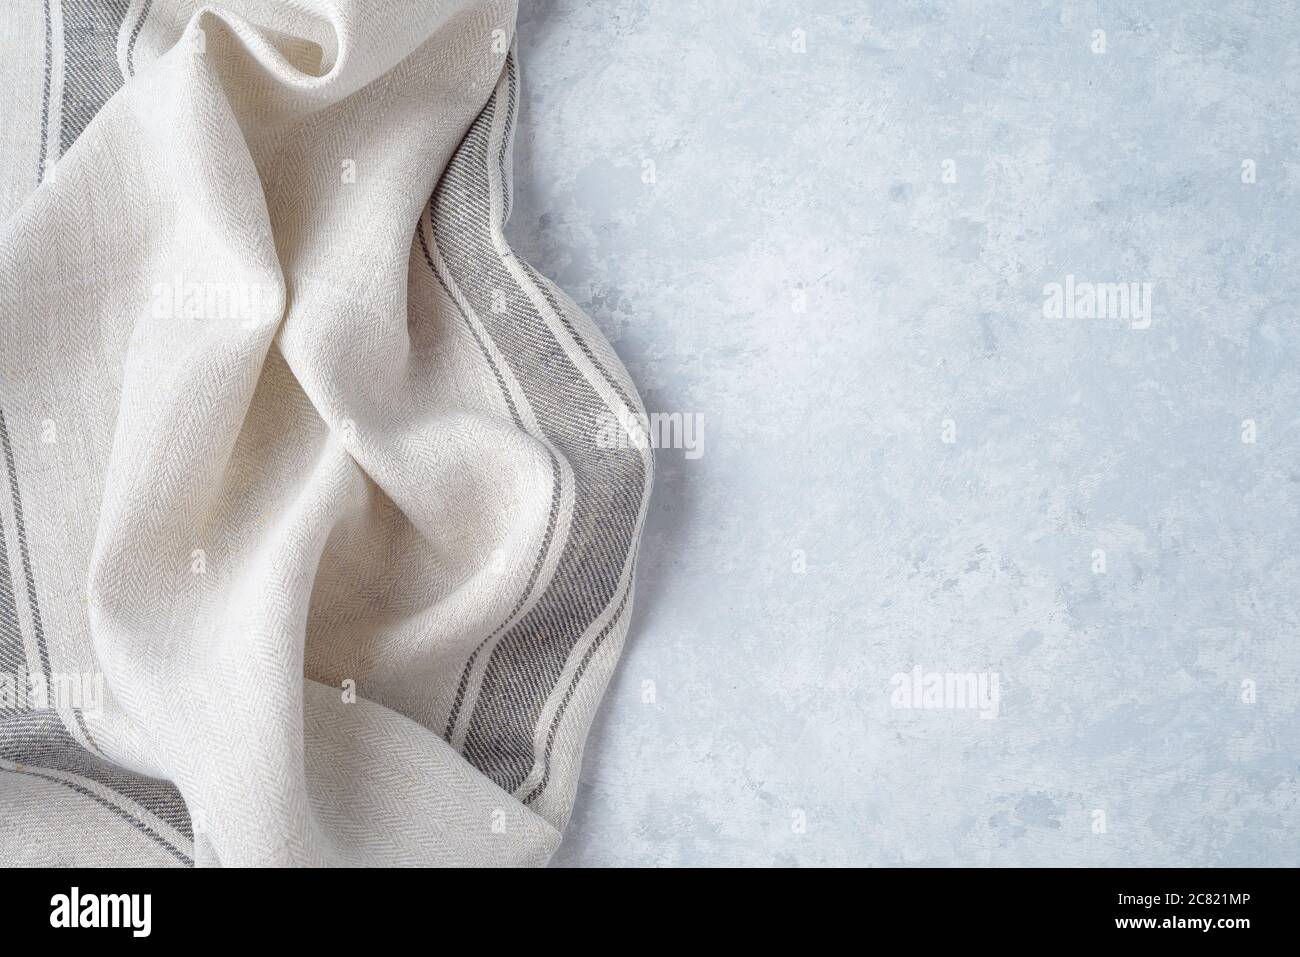 https://c8.alamy.com/comp/2C821MP/kitchen-cloth-napkin-on-wood-background-with-copy-space-2C821MP.jpg